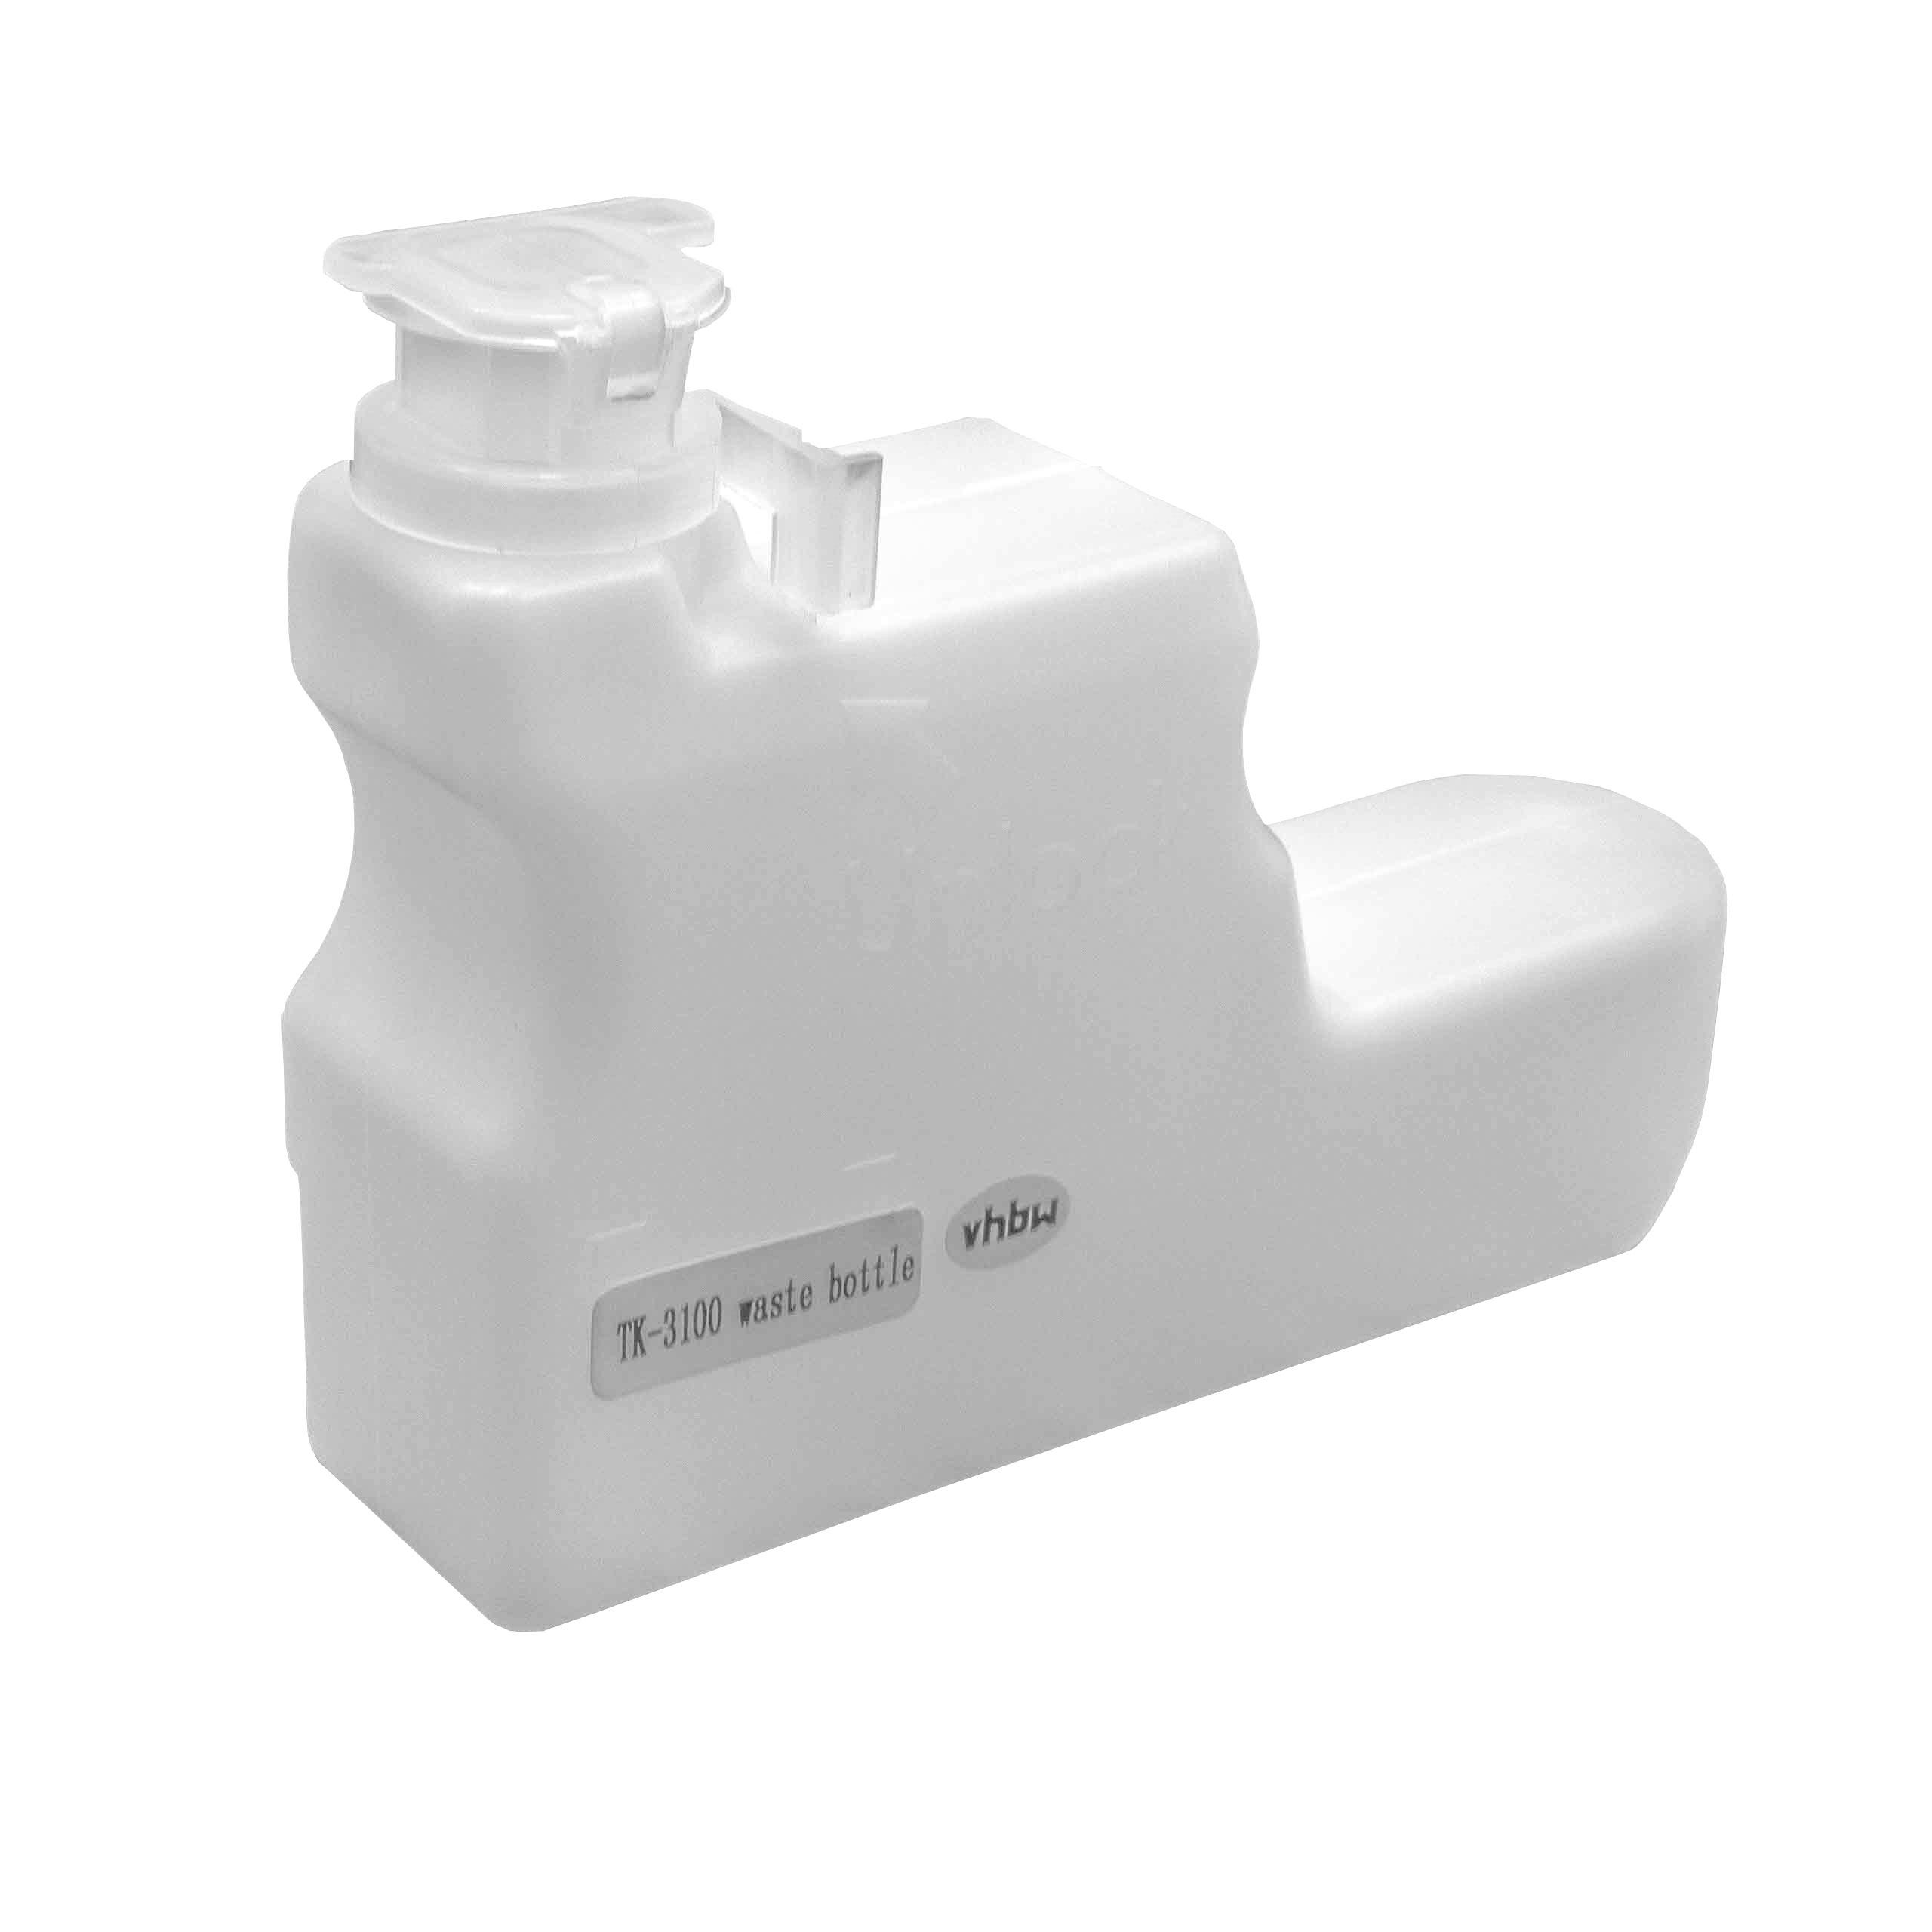 Waste Toner Container as Replacement for Kyocera WT-3100 - White